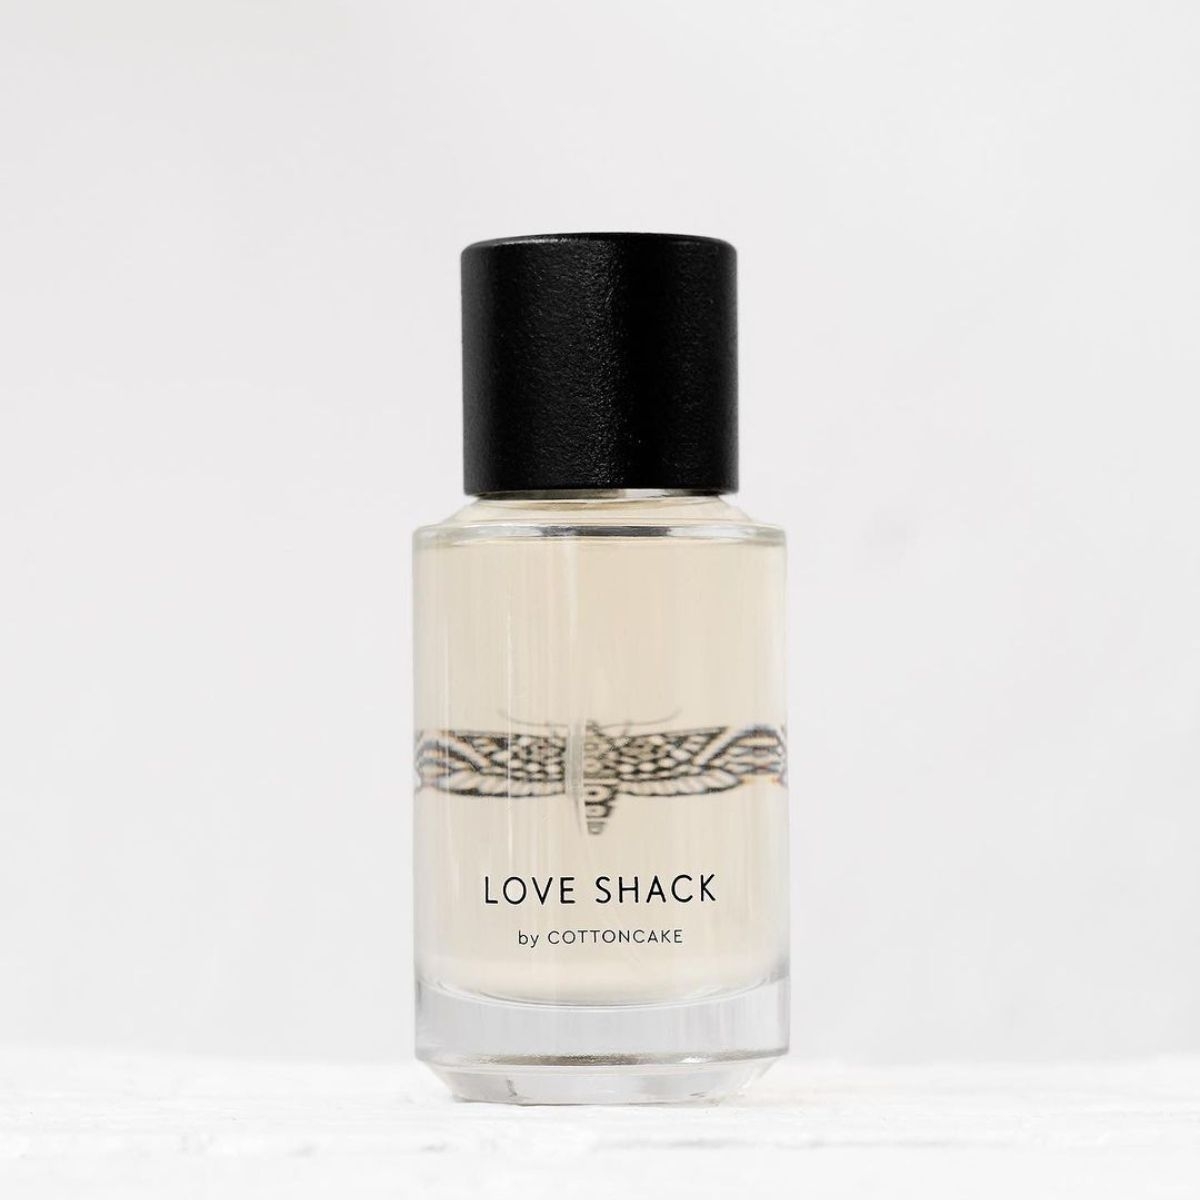 Image of Love Shack by the perfume brand Cottoncake